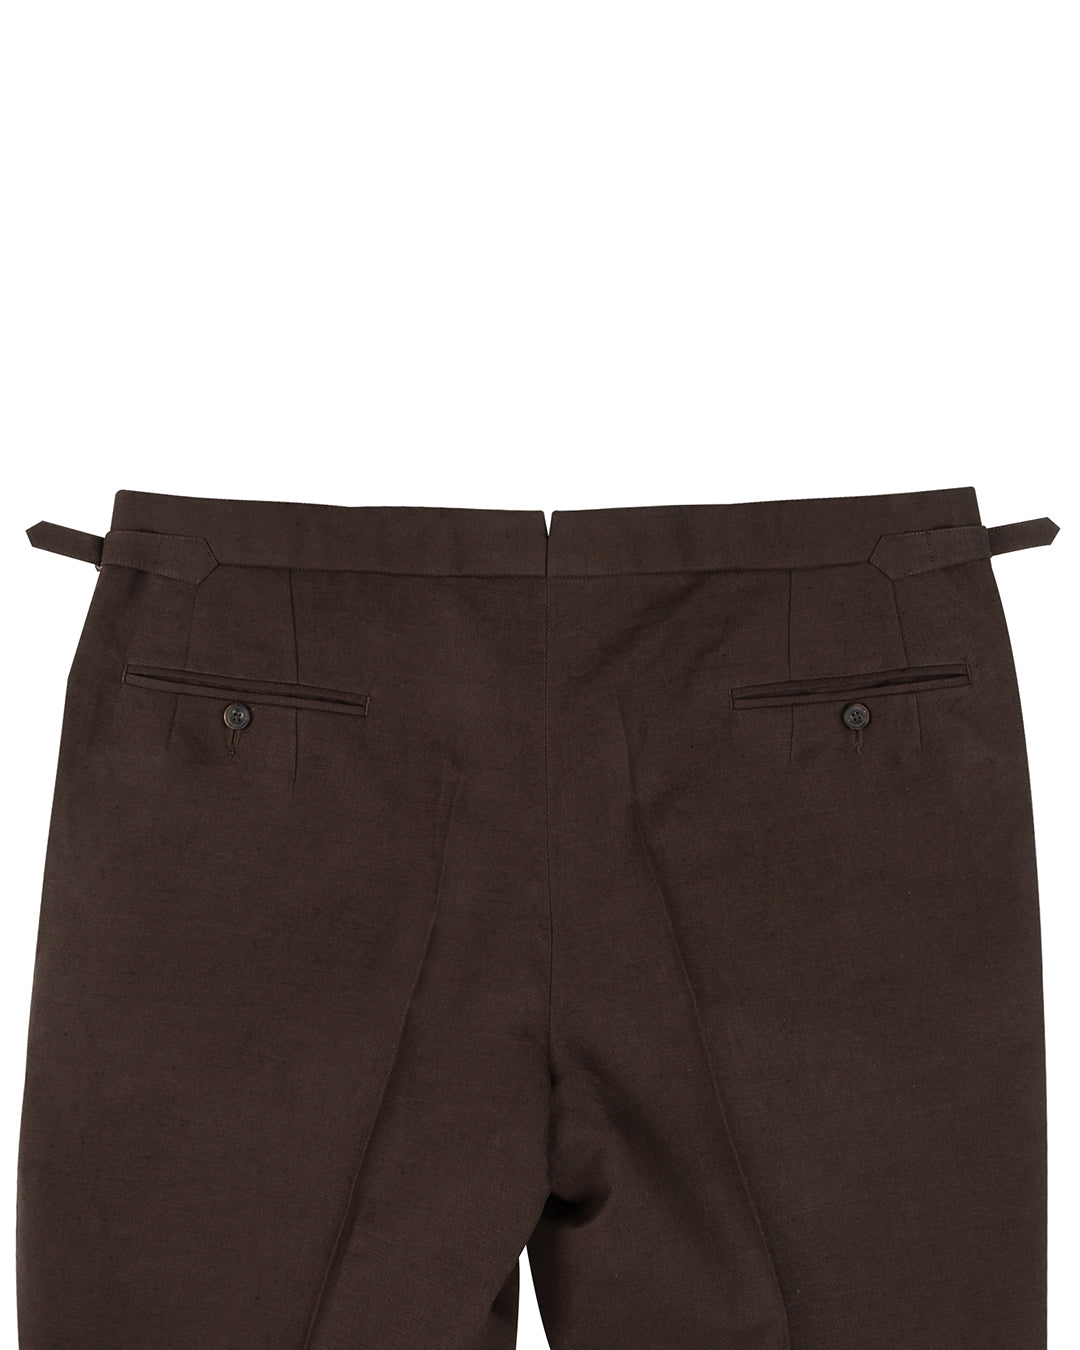 Back view of custom linen chino pants for men by Luxire in brown